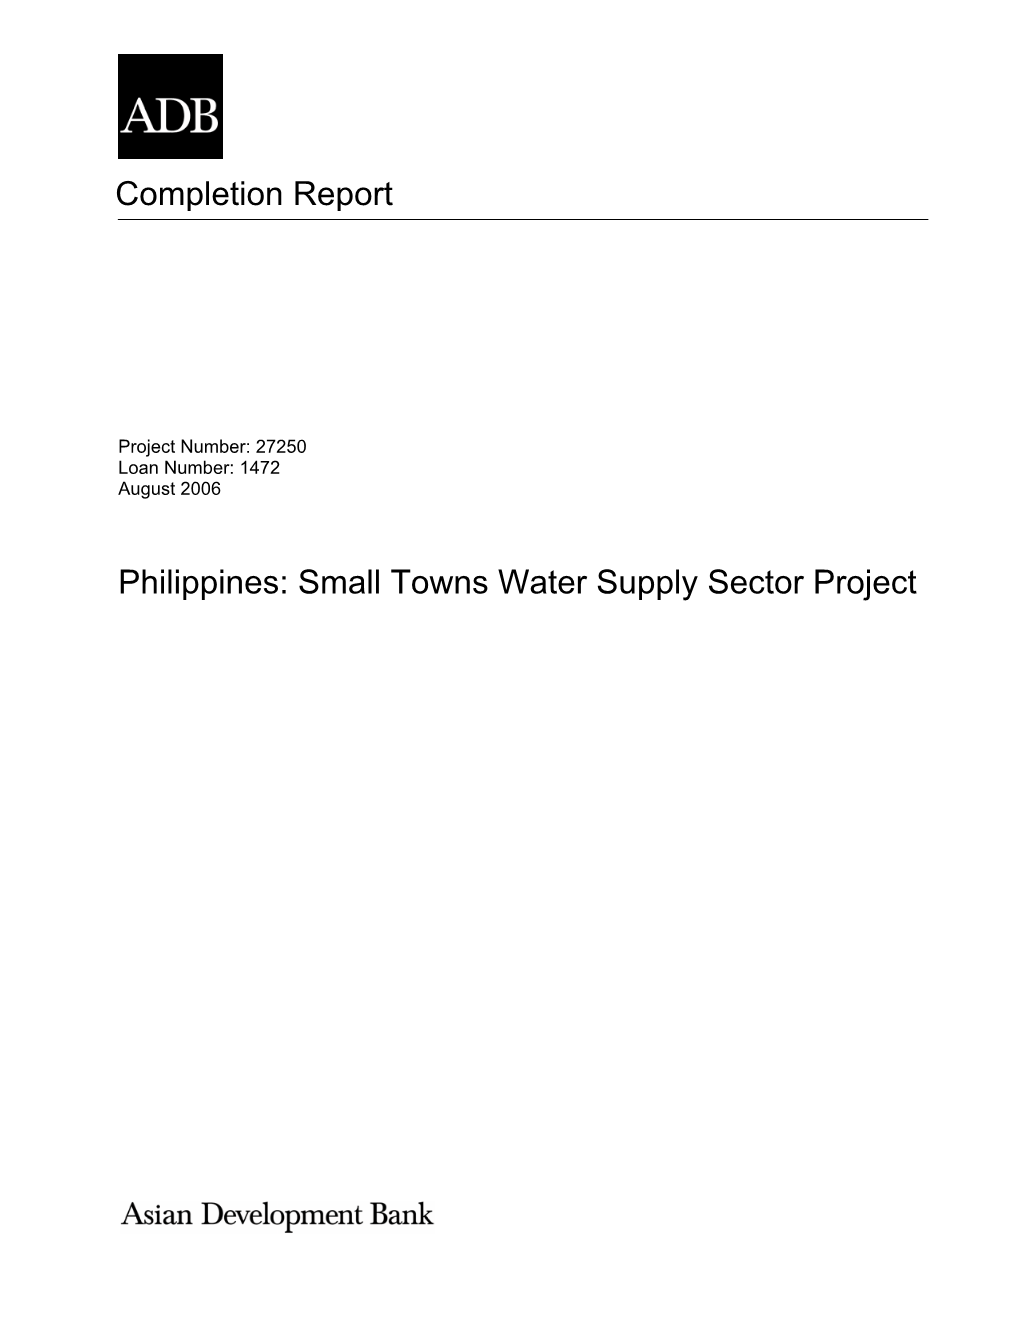 Small Towns Water Supply Sector Project